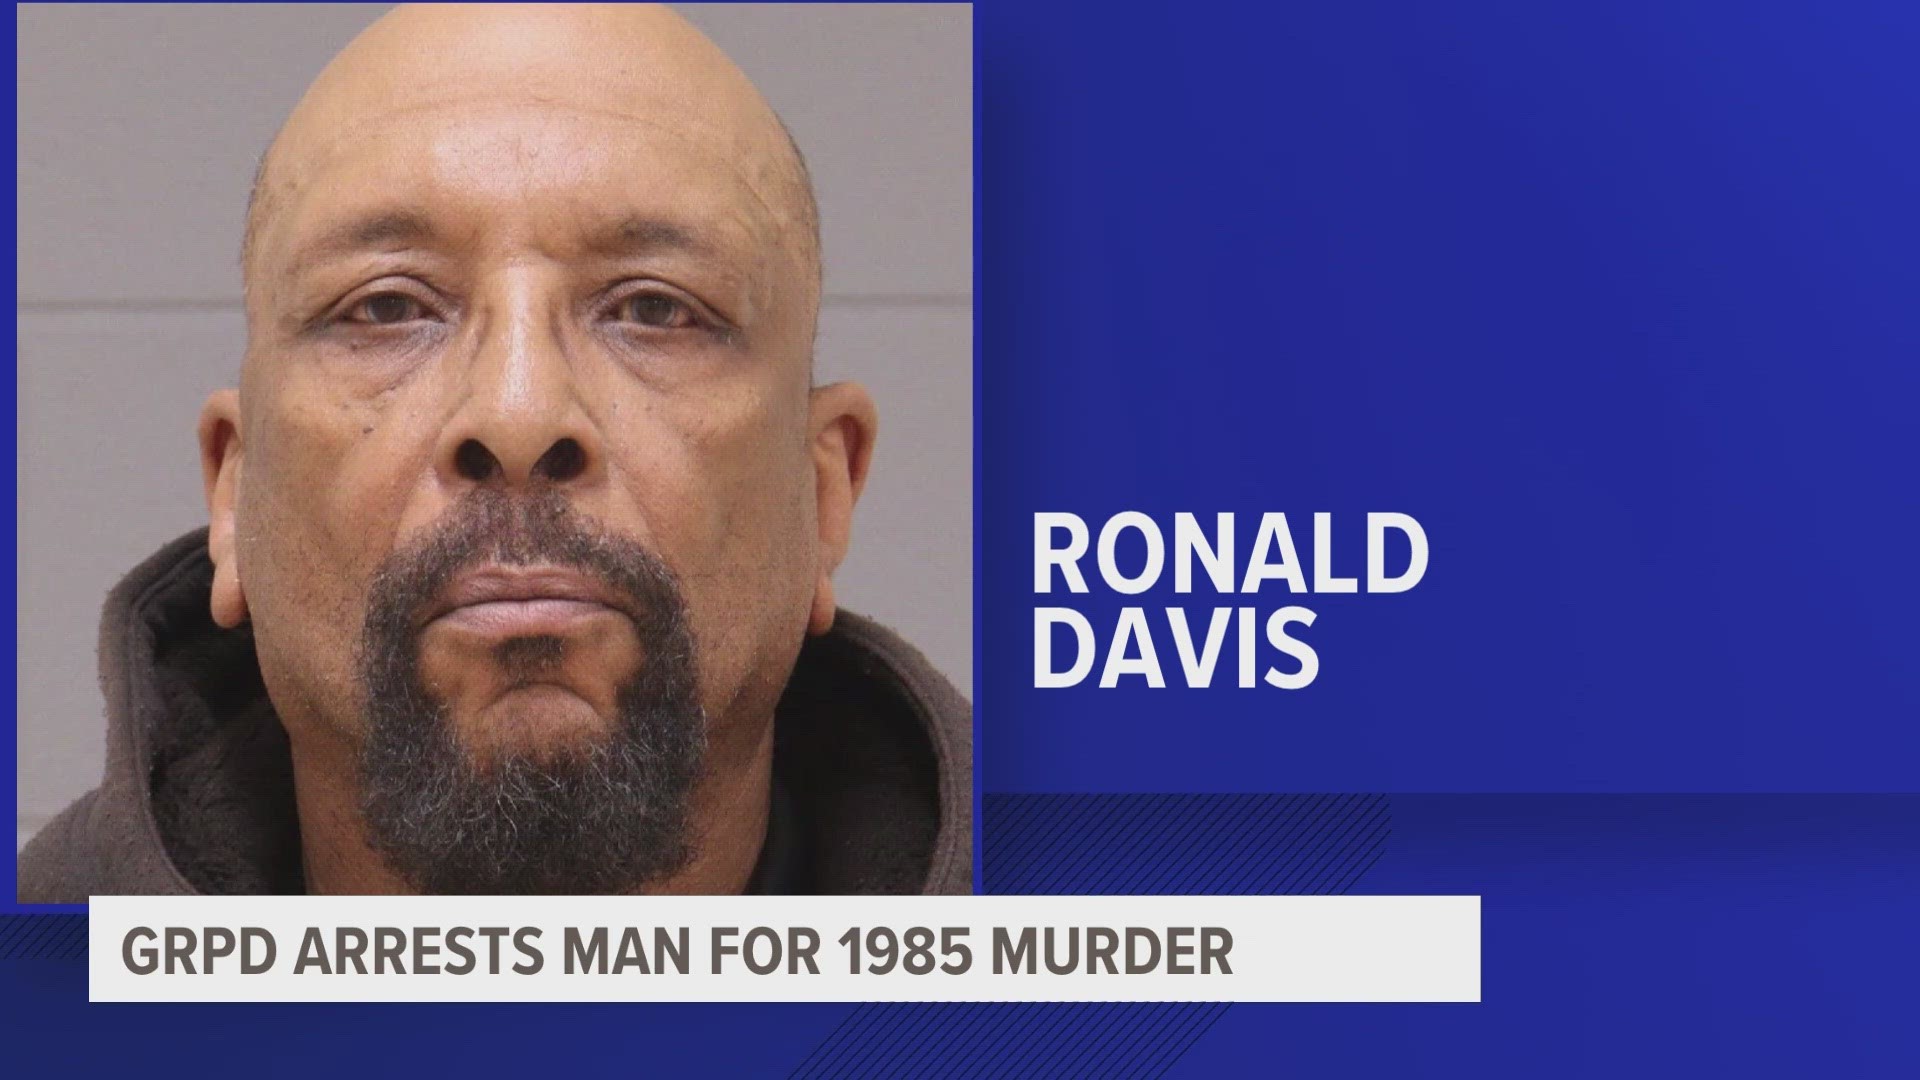 68-year-old Ronald Davis was taken into custody in connection to the death of 48-year-old Burnett Frierson, who was killed back on Sept. 4, 1985.